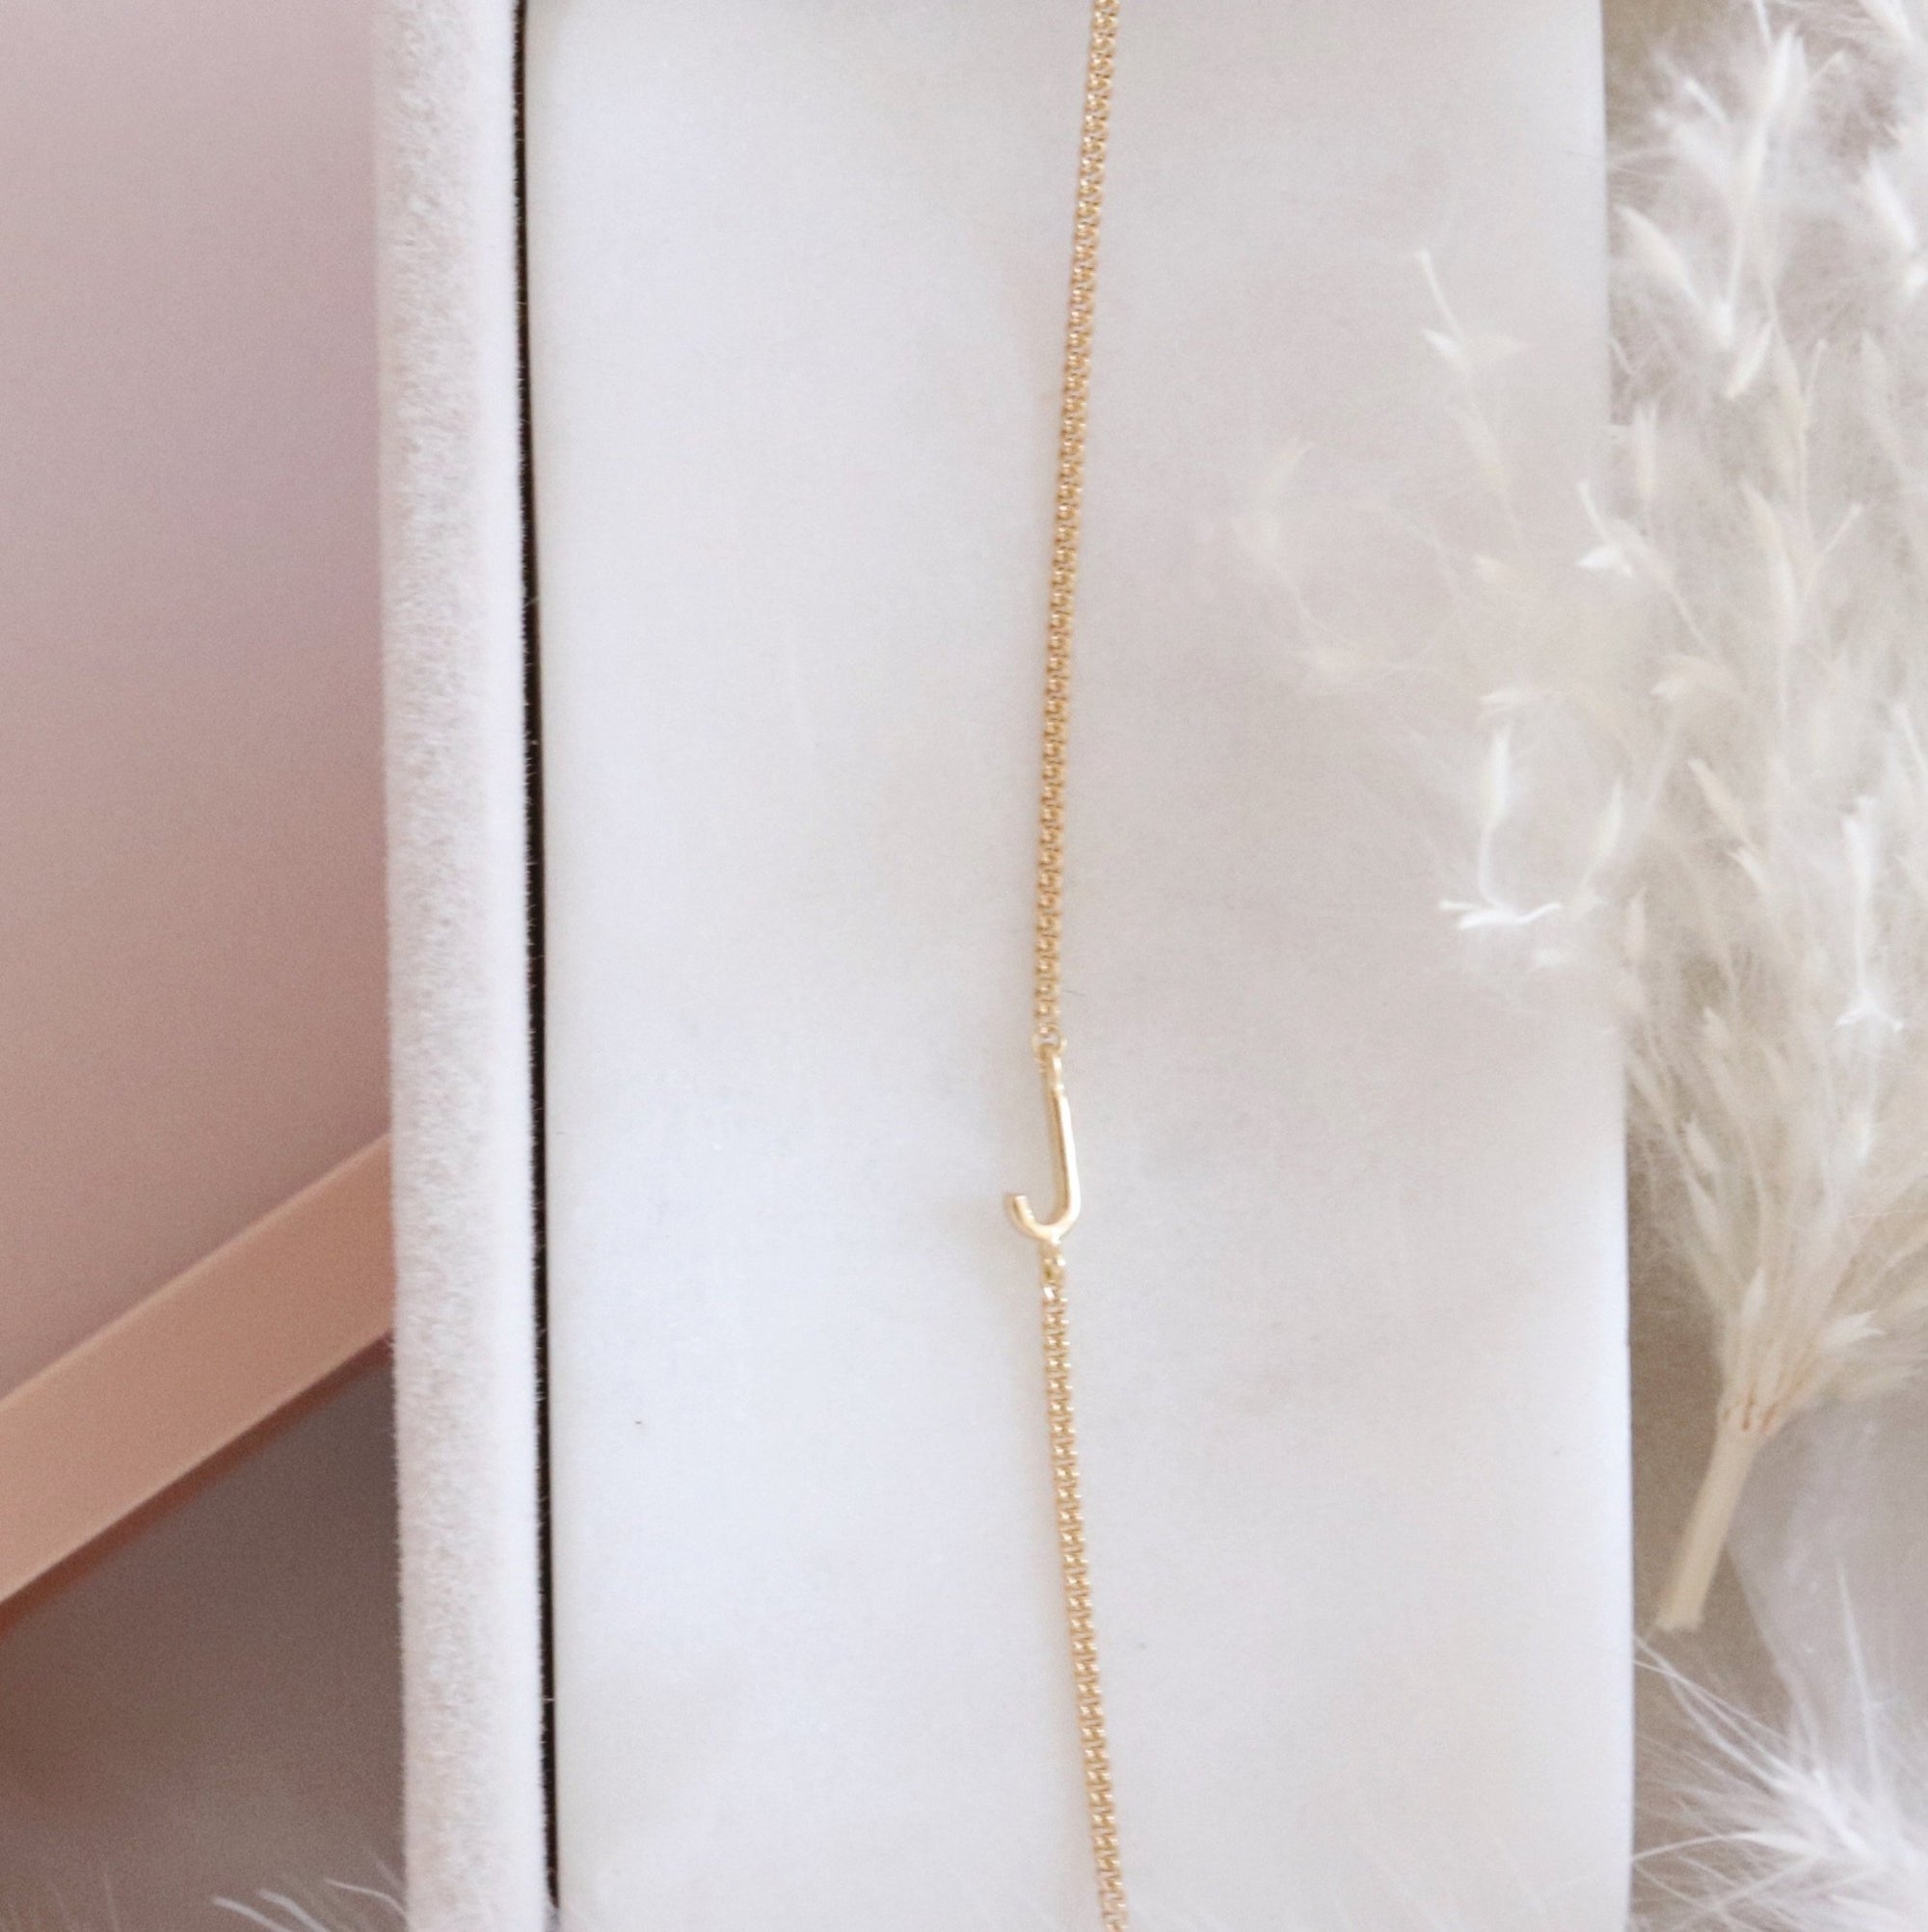 NOTABLE OFFSET INITIAL NECKLACE - J - GOLD - SO PRETTY CARA COTTER